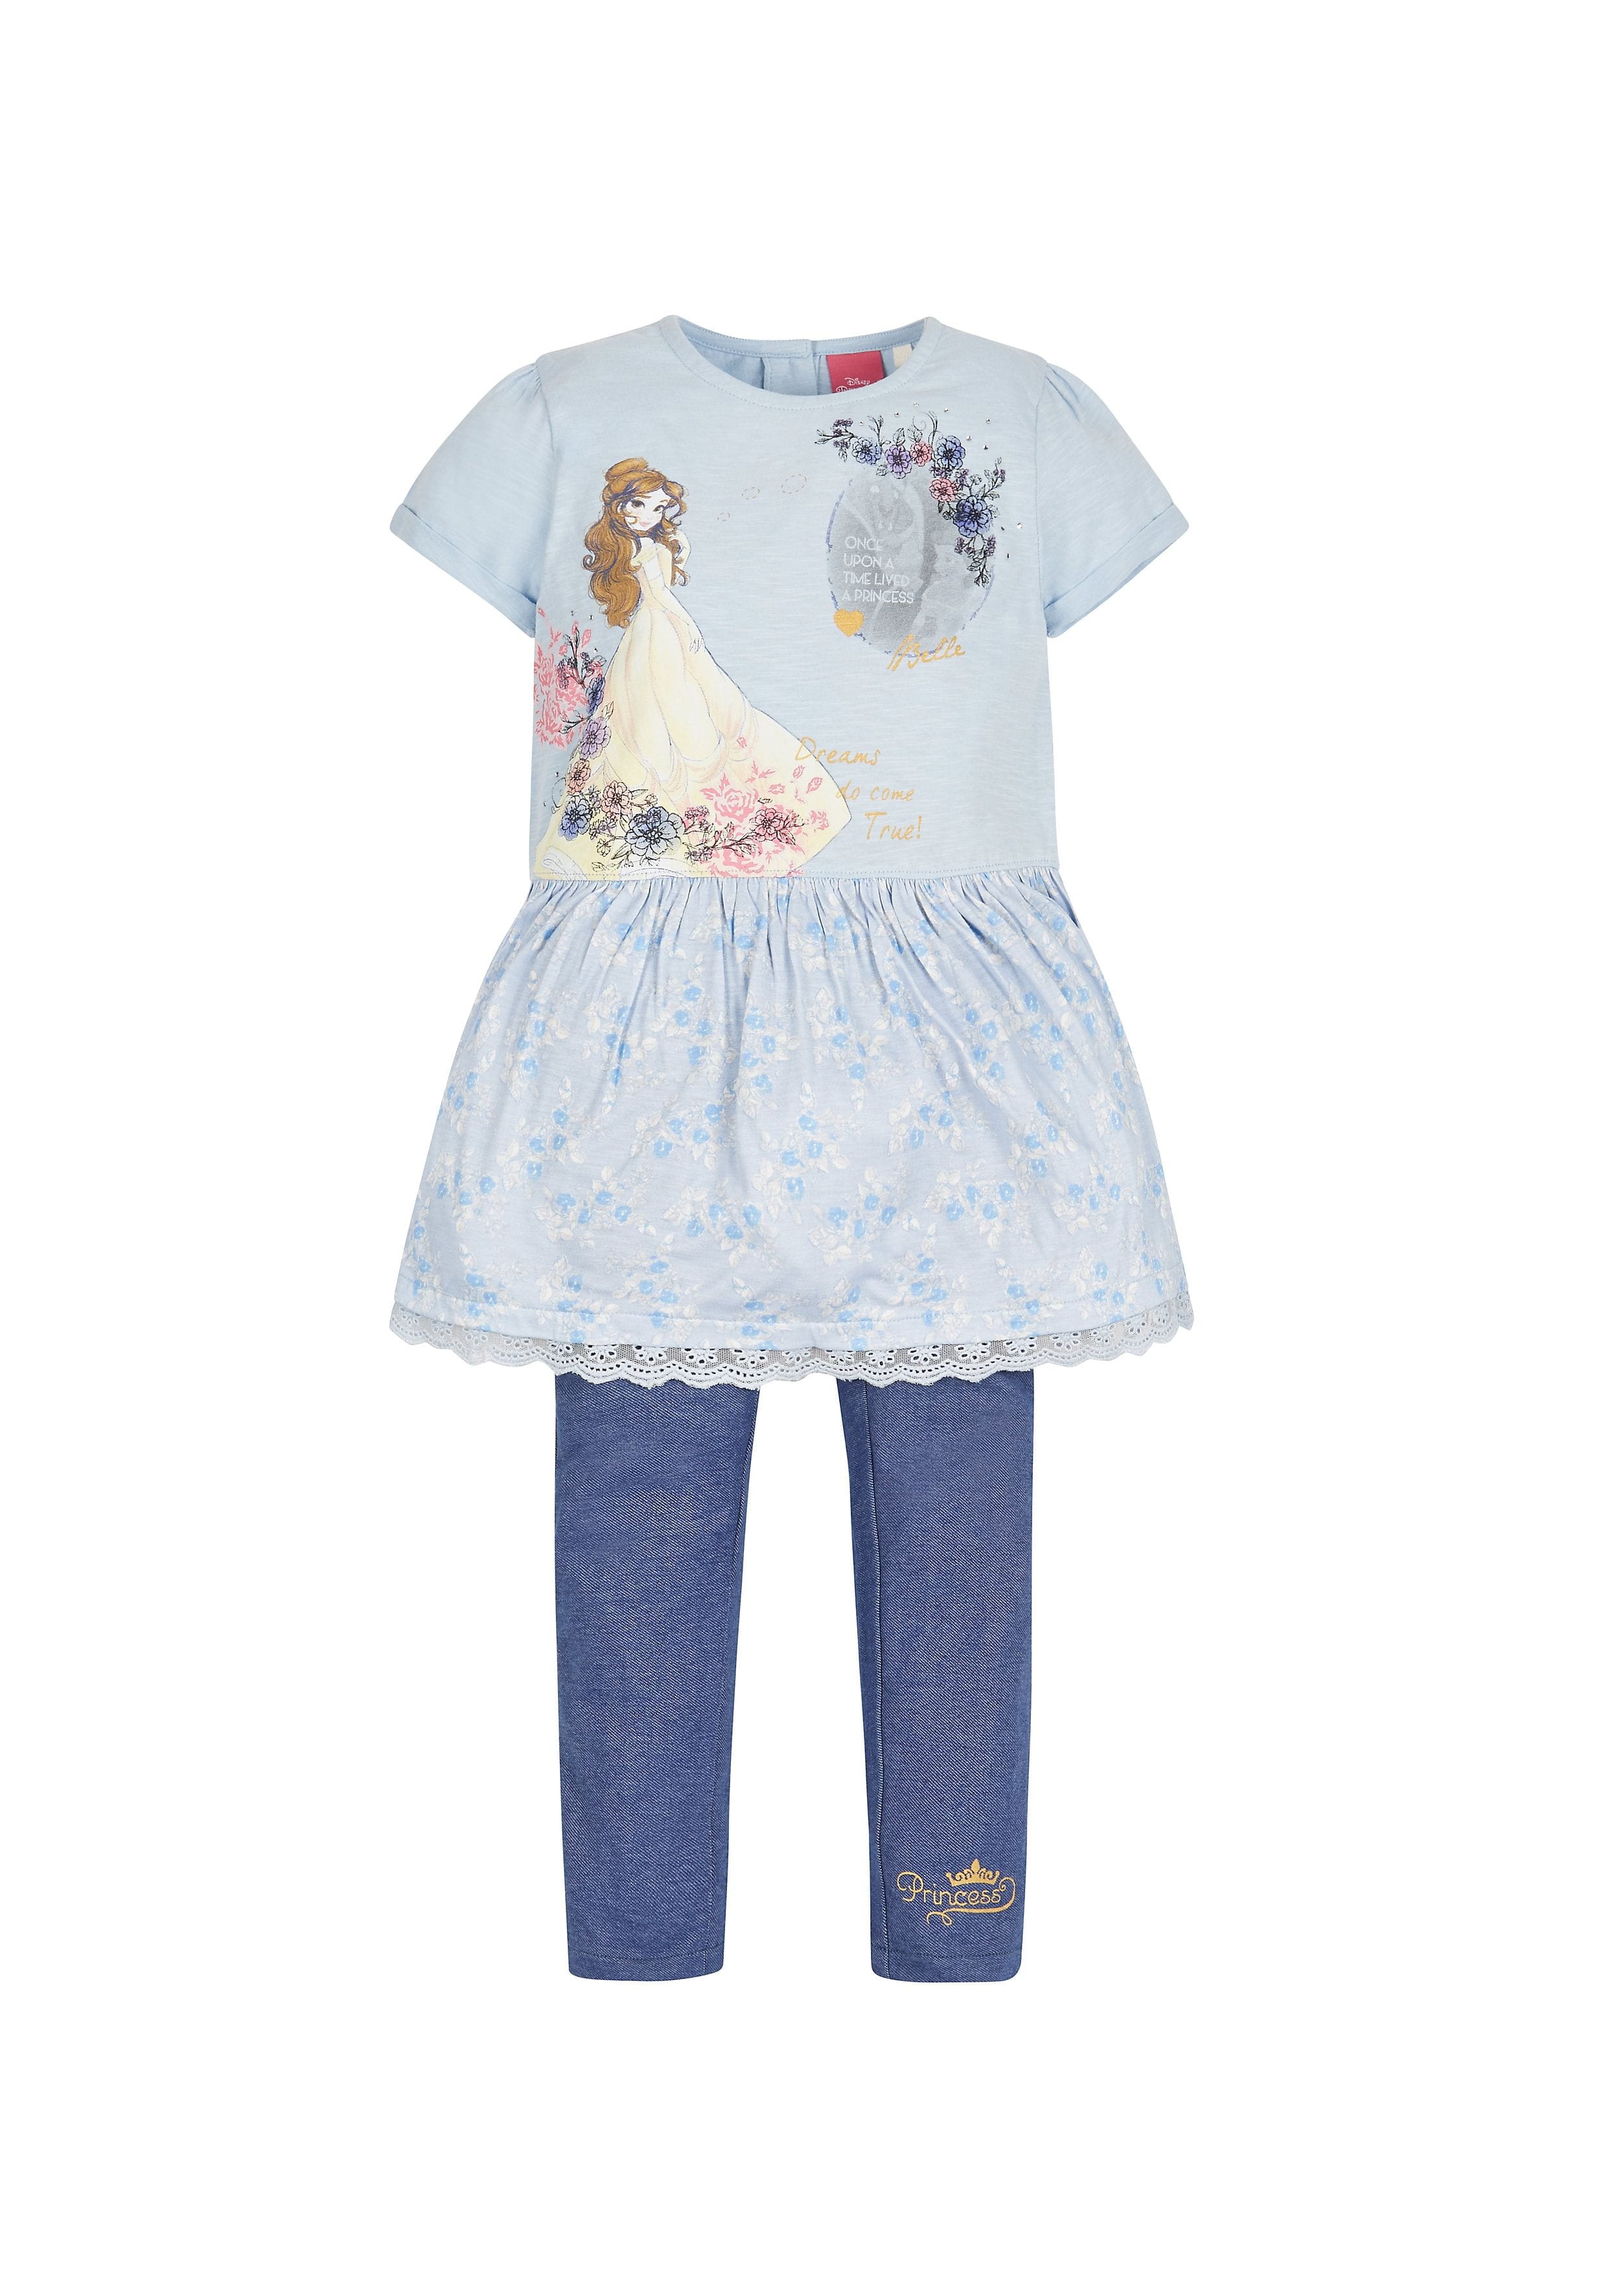 Mothercare | Girls Disney Beauty And The Beast Leggings And Tunic Set - Blue 0